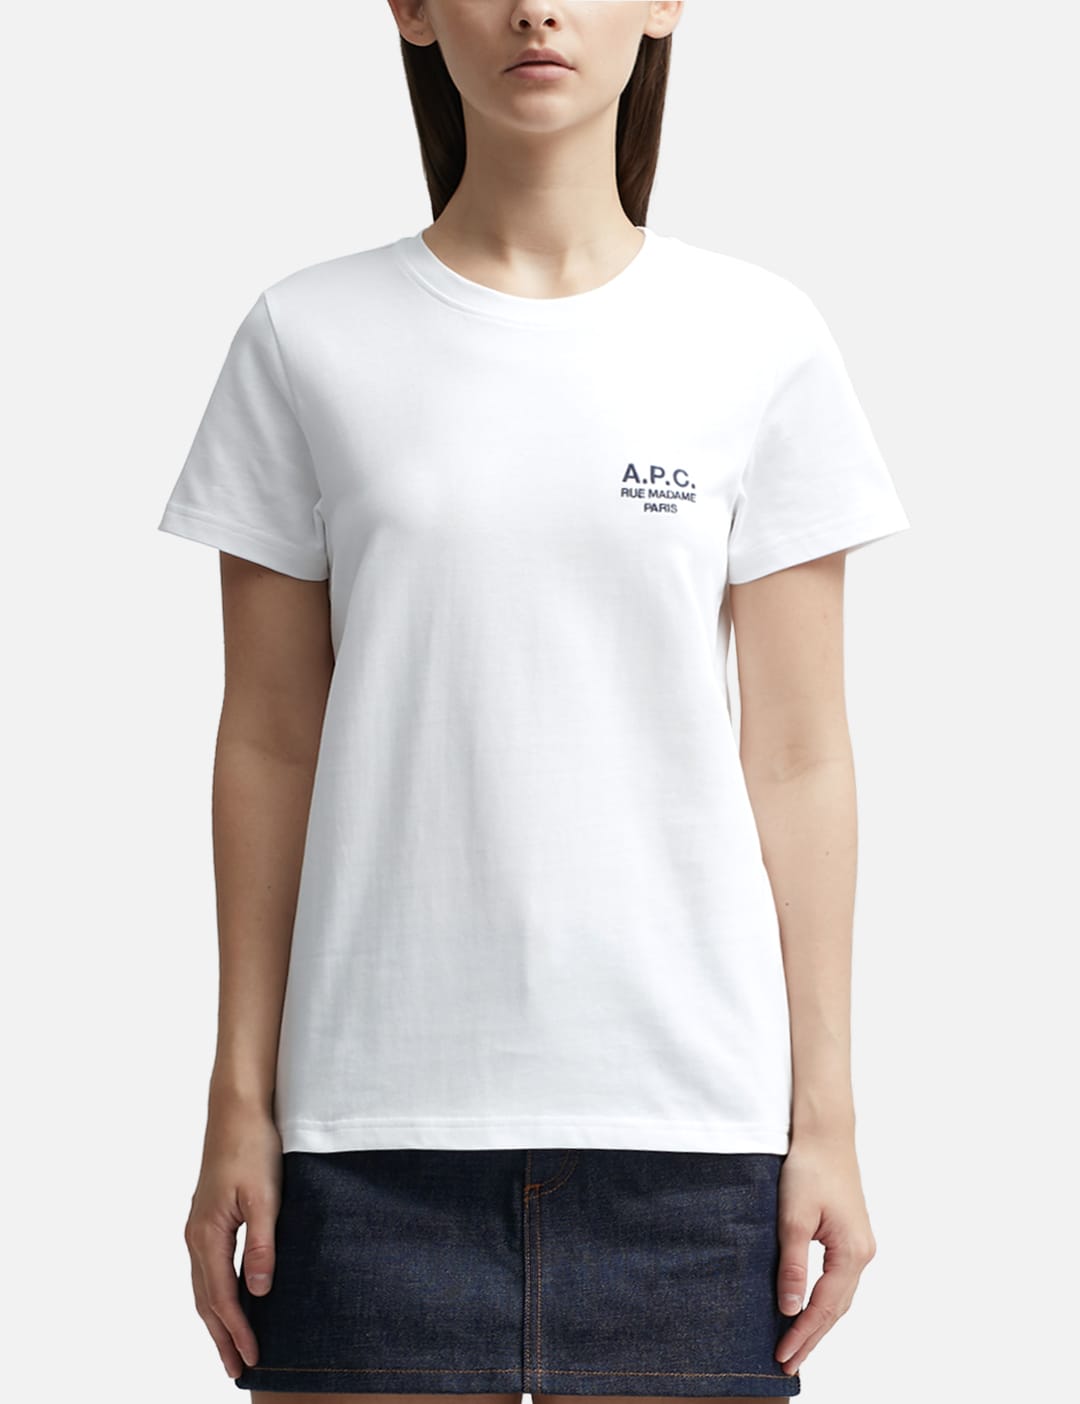 A.P.C. - Denise T-shirt | HBX - Globally Curated Fashion and